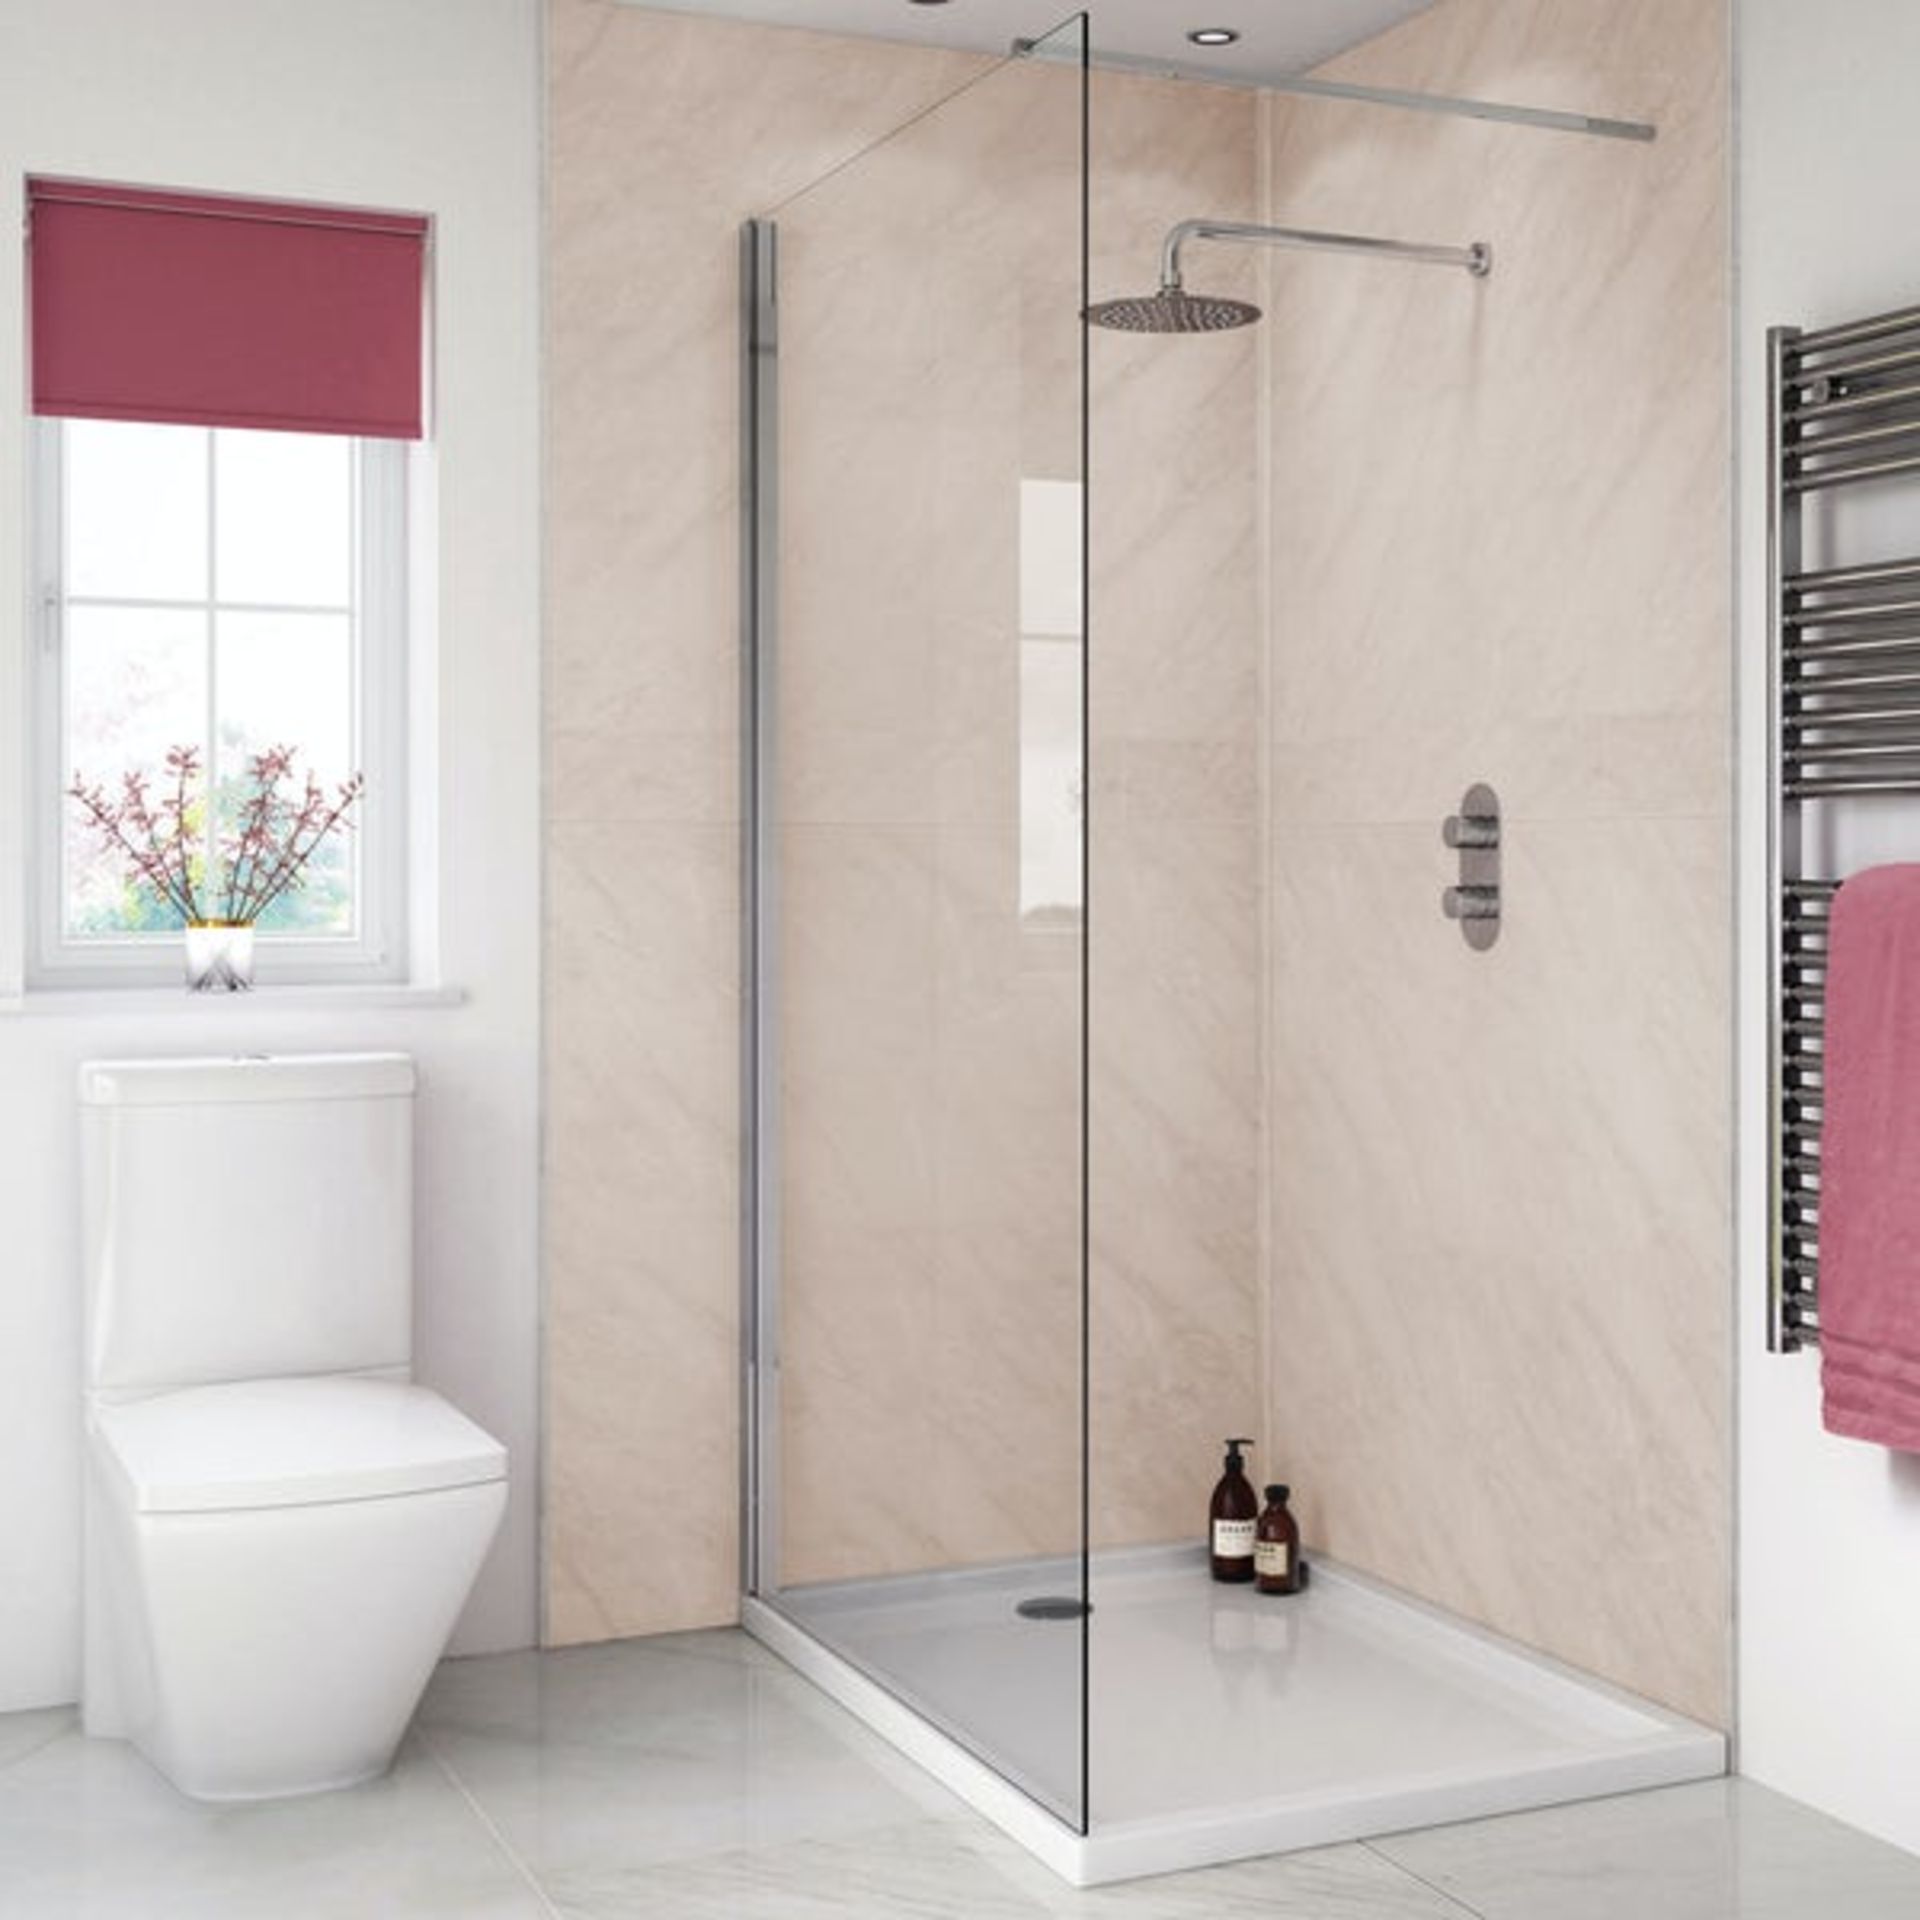 Splash Panel 2 sided shower wall kit in Classic Marble, new and boxed, the kit contains 2 - Image 2 of 4